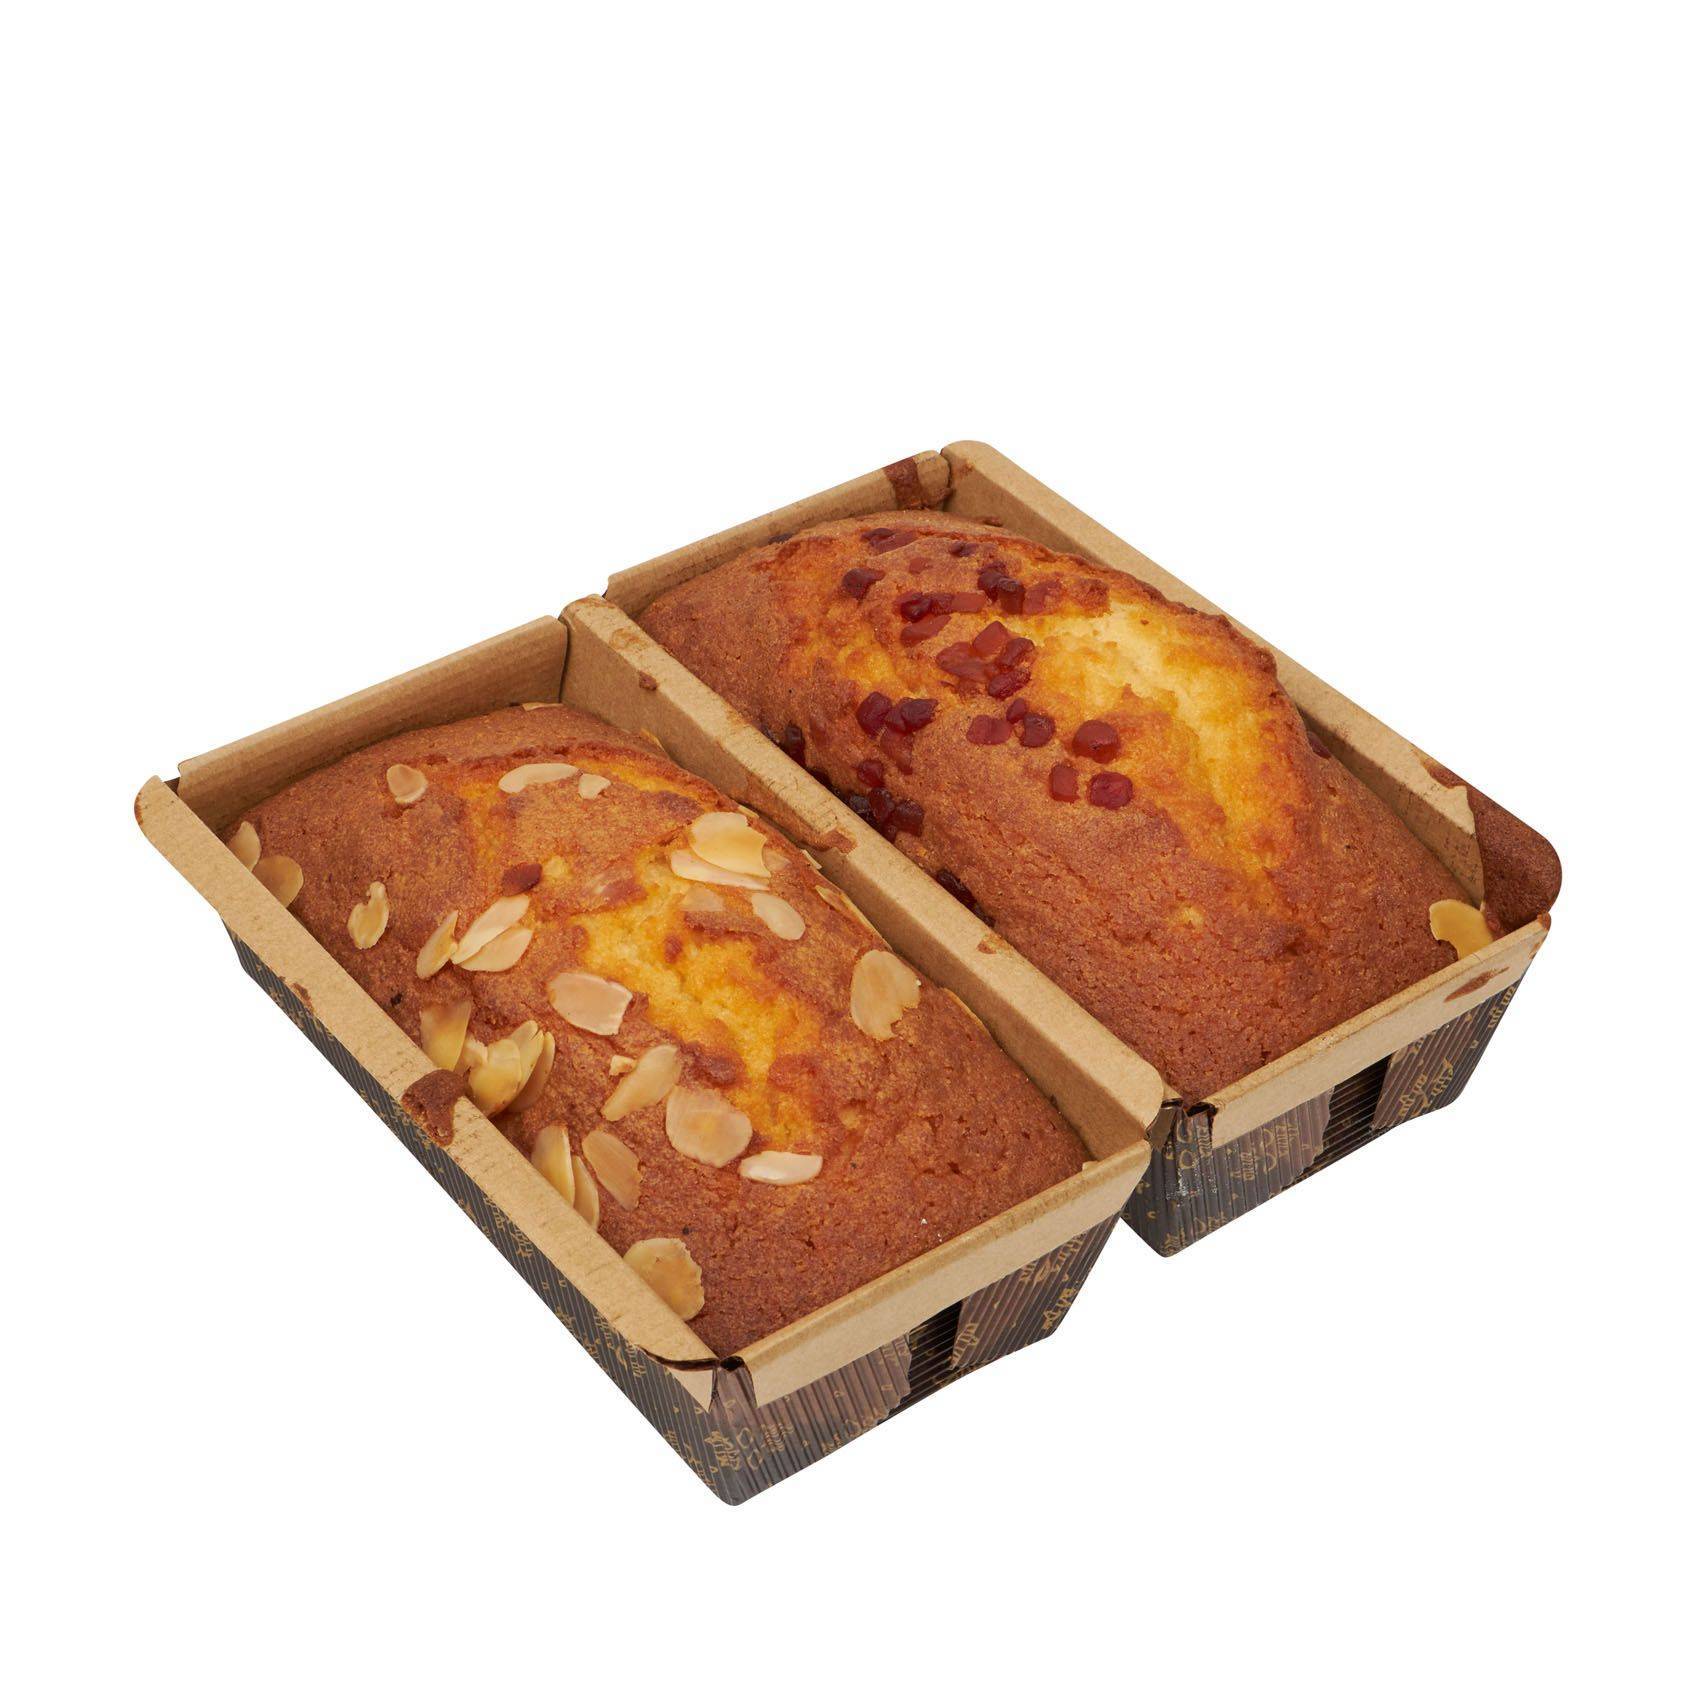 Buy Assorted English Cakes 2-Piece Pack Online - Shop Bakery on Carrefour  UAE